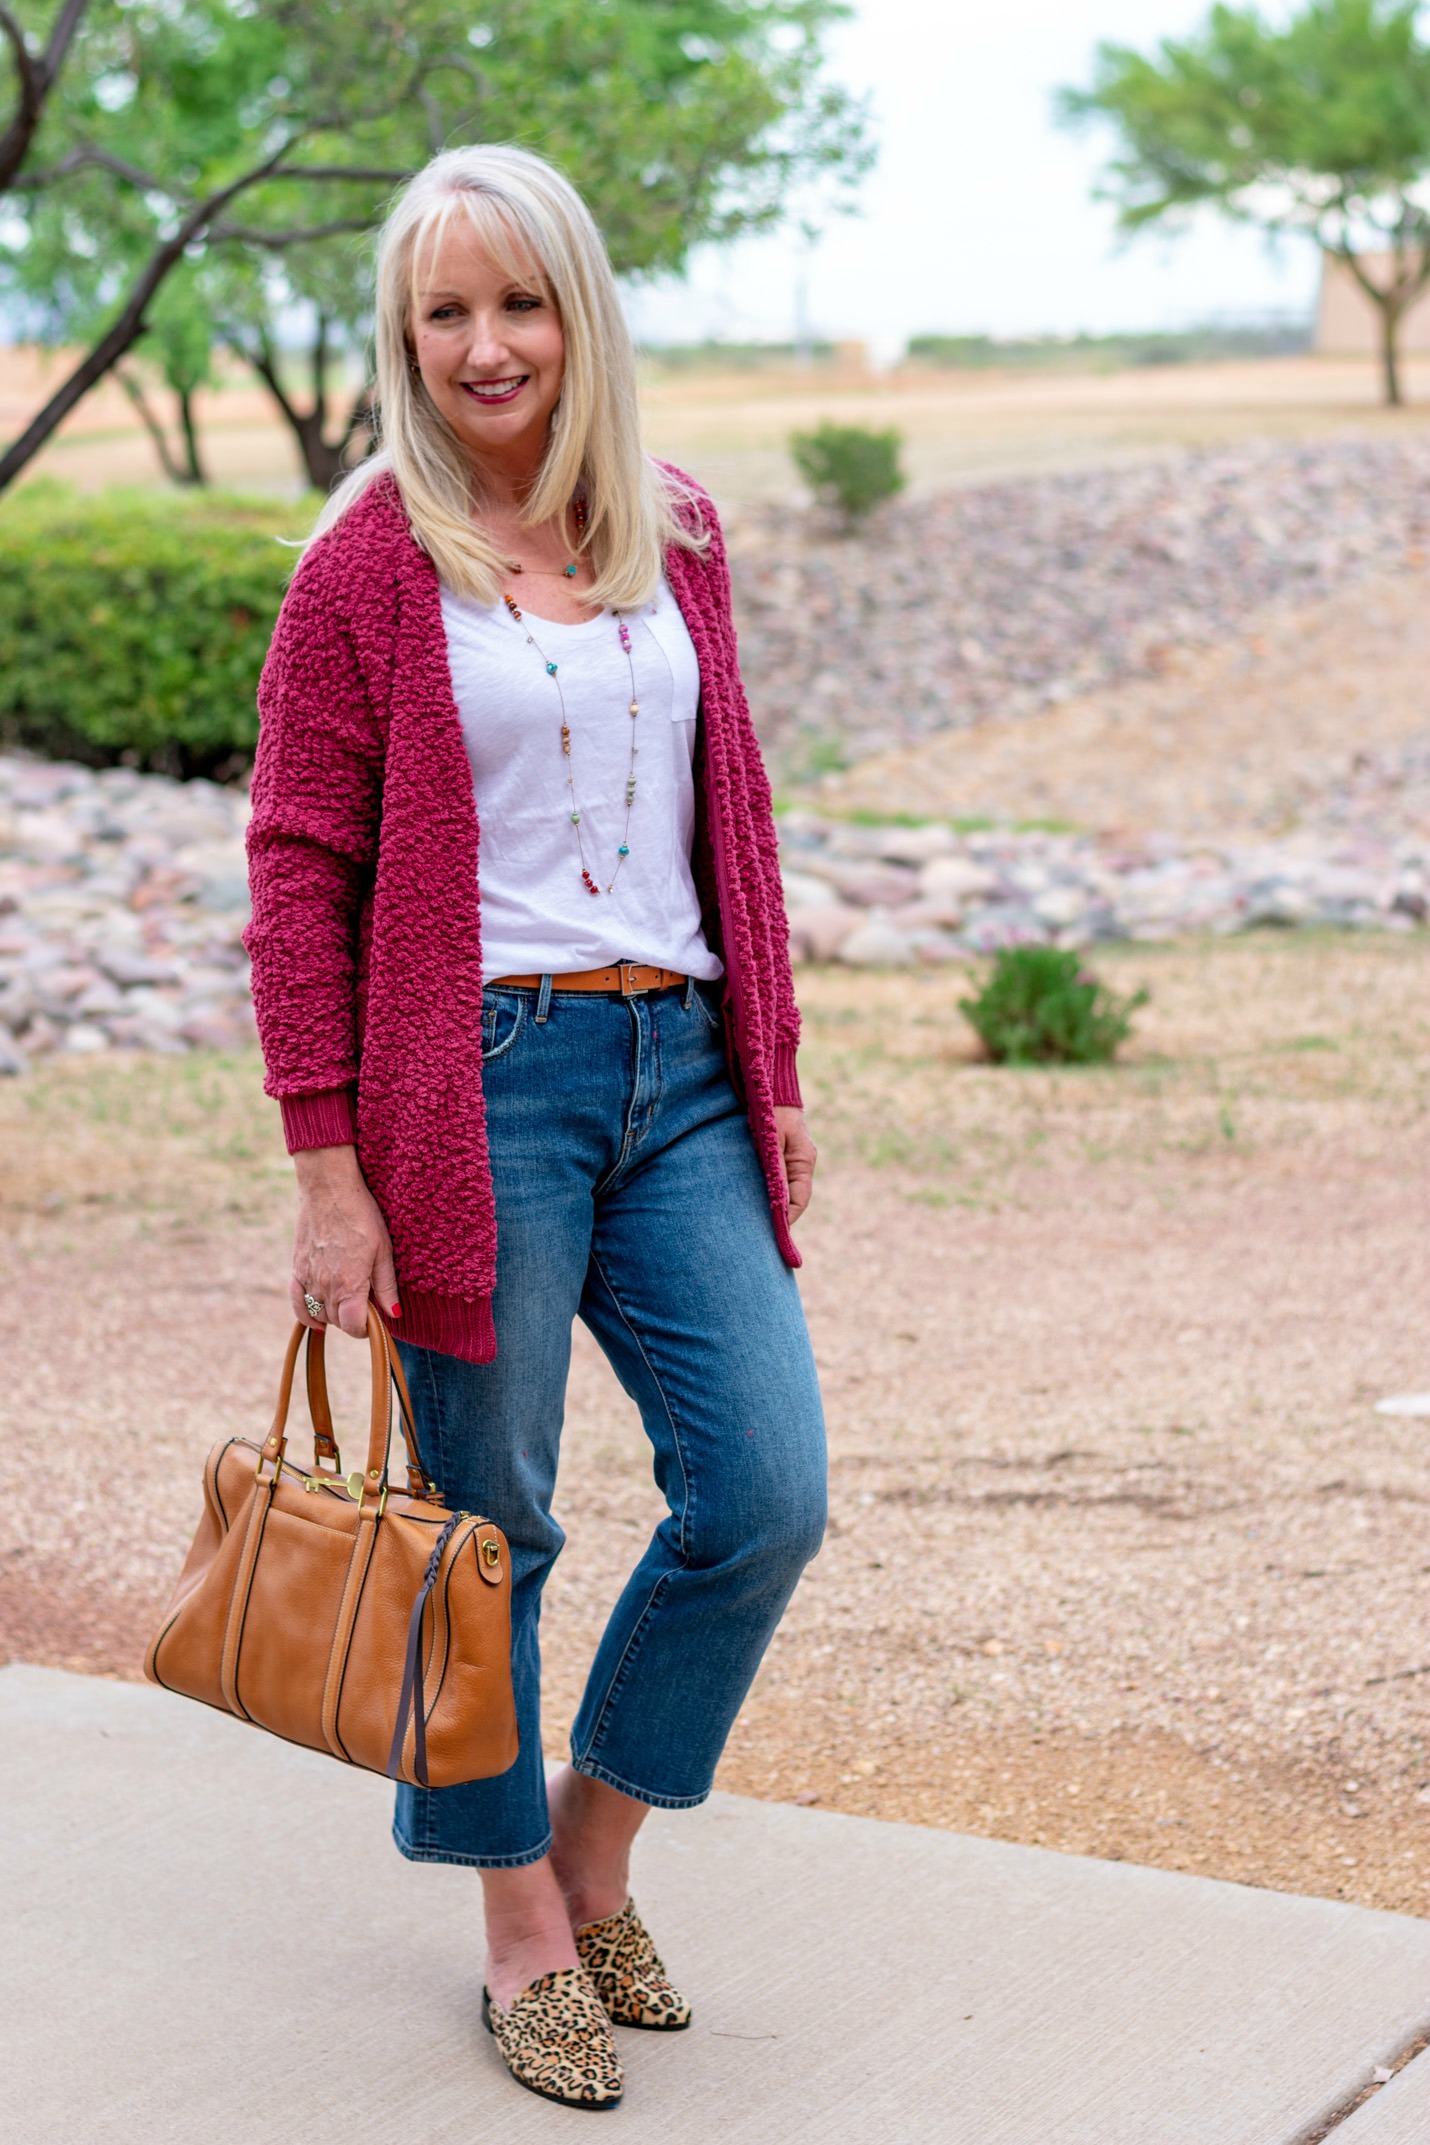 Fall Cardigan and Jeans